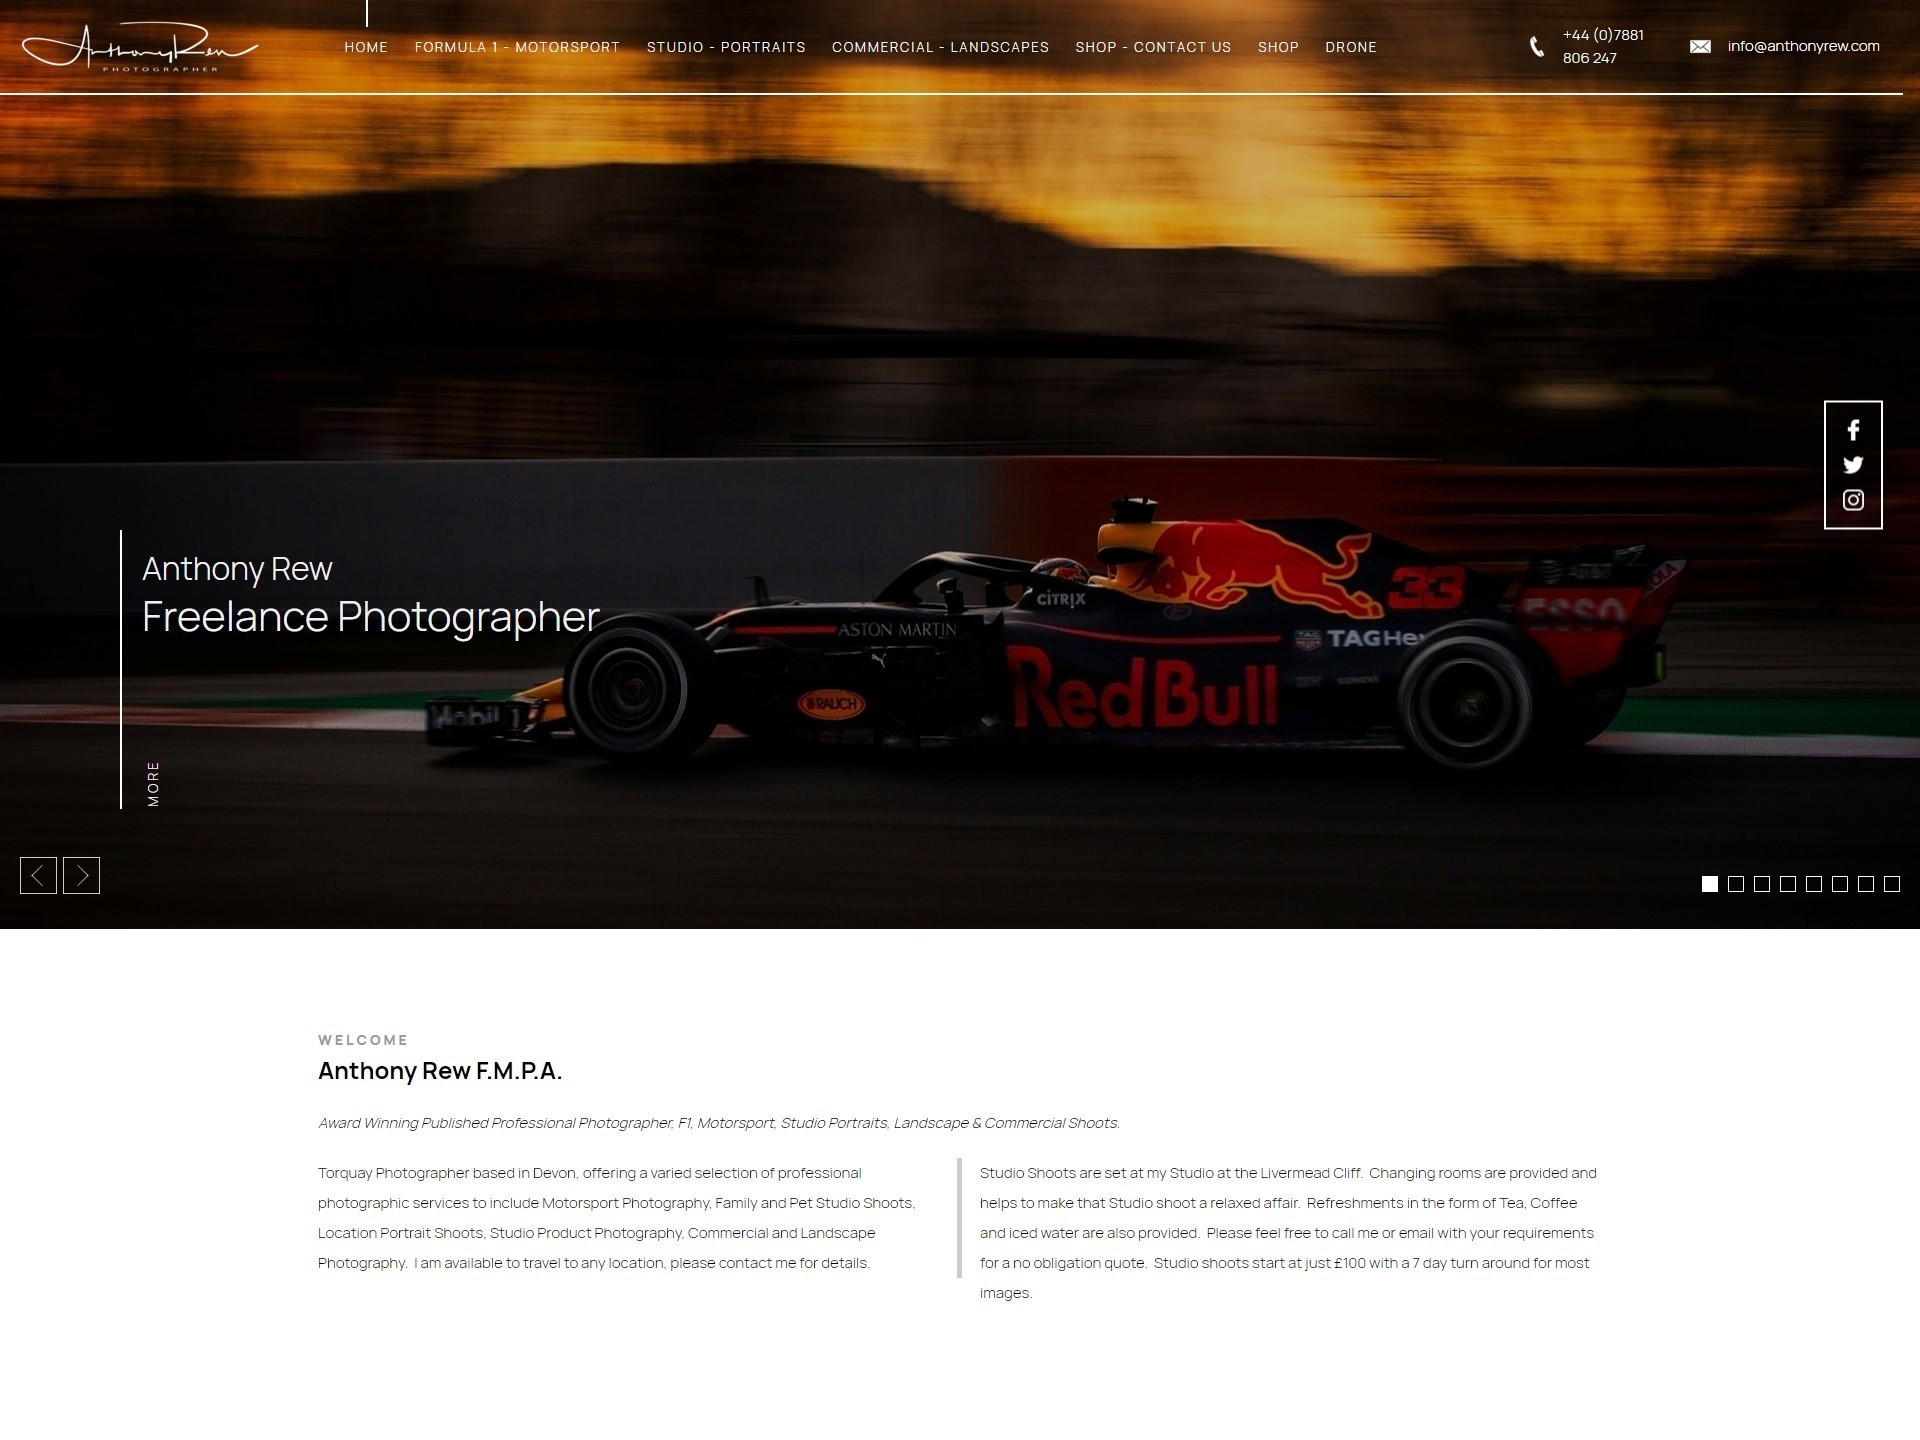 A web design for a freelance photographer based in Exeter